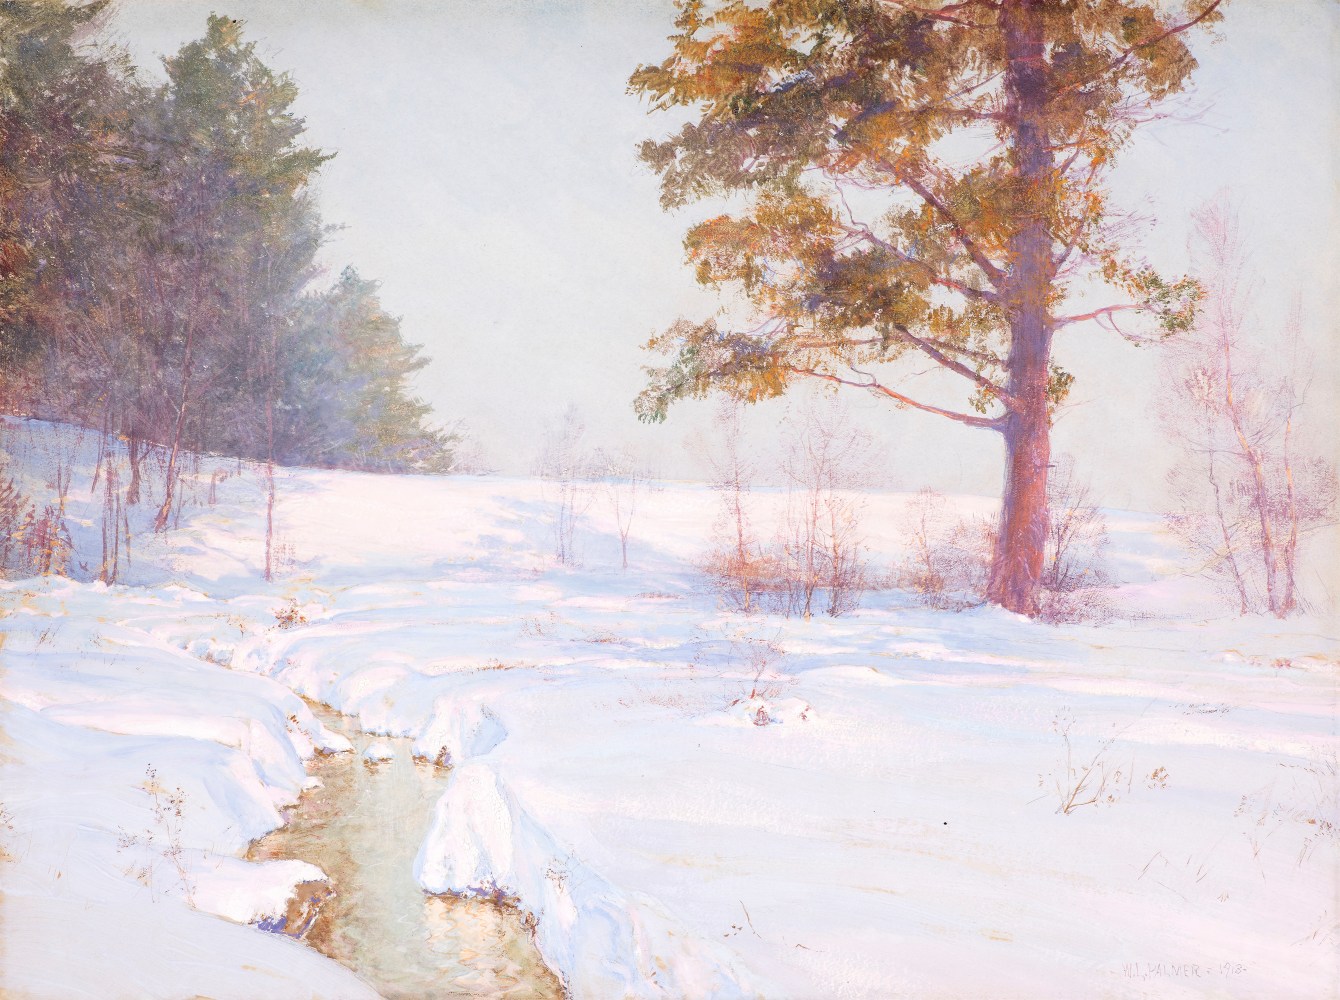 Walter Launt Palmer (1854–1932), Stream in Winter, 1913, watercolor and gouache on paper, 18 x 24 in., signed and dated lower right: W. L. Palmer 1913